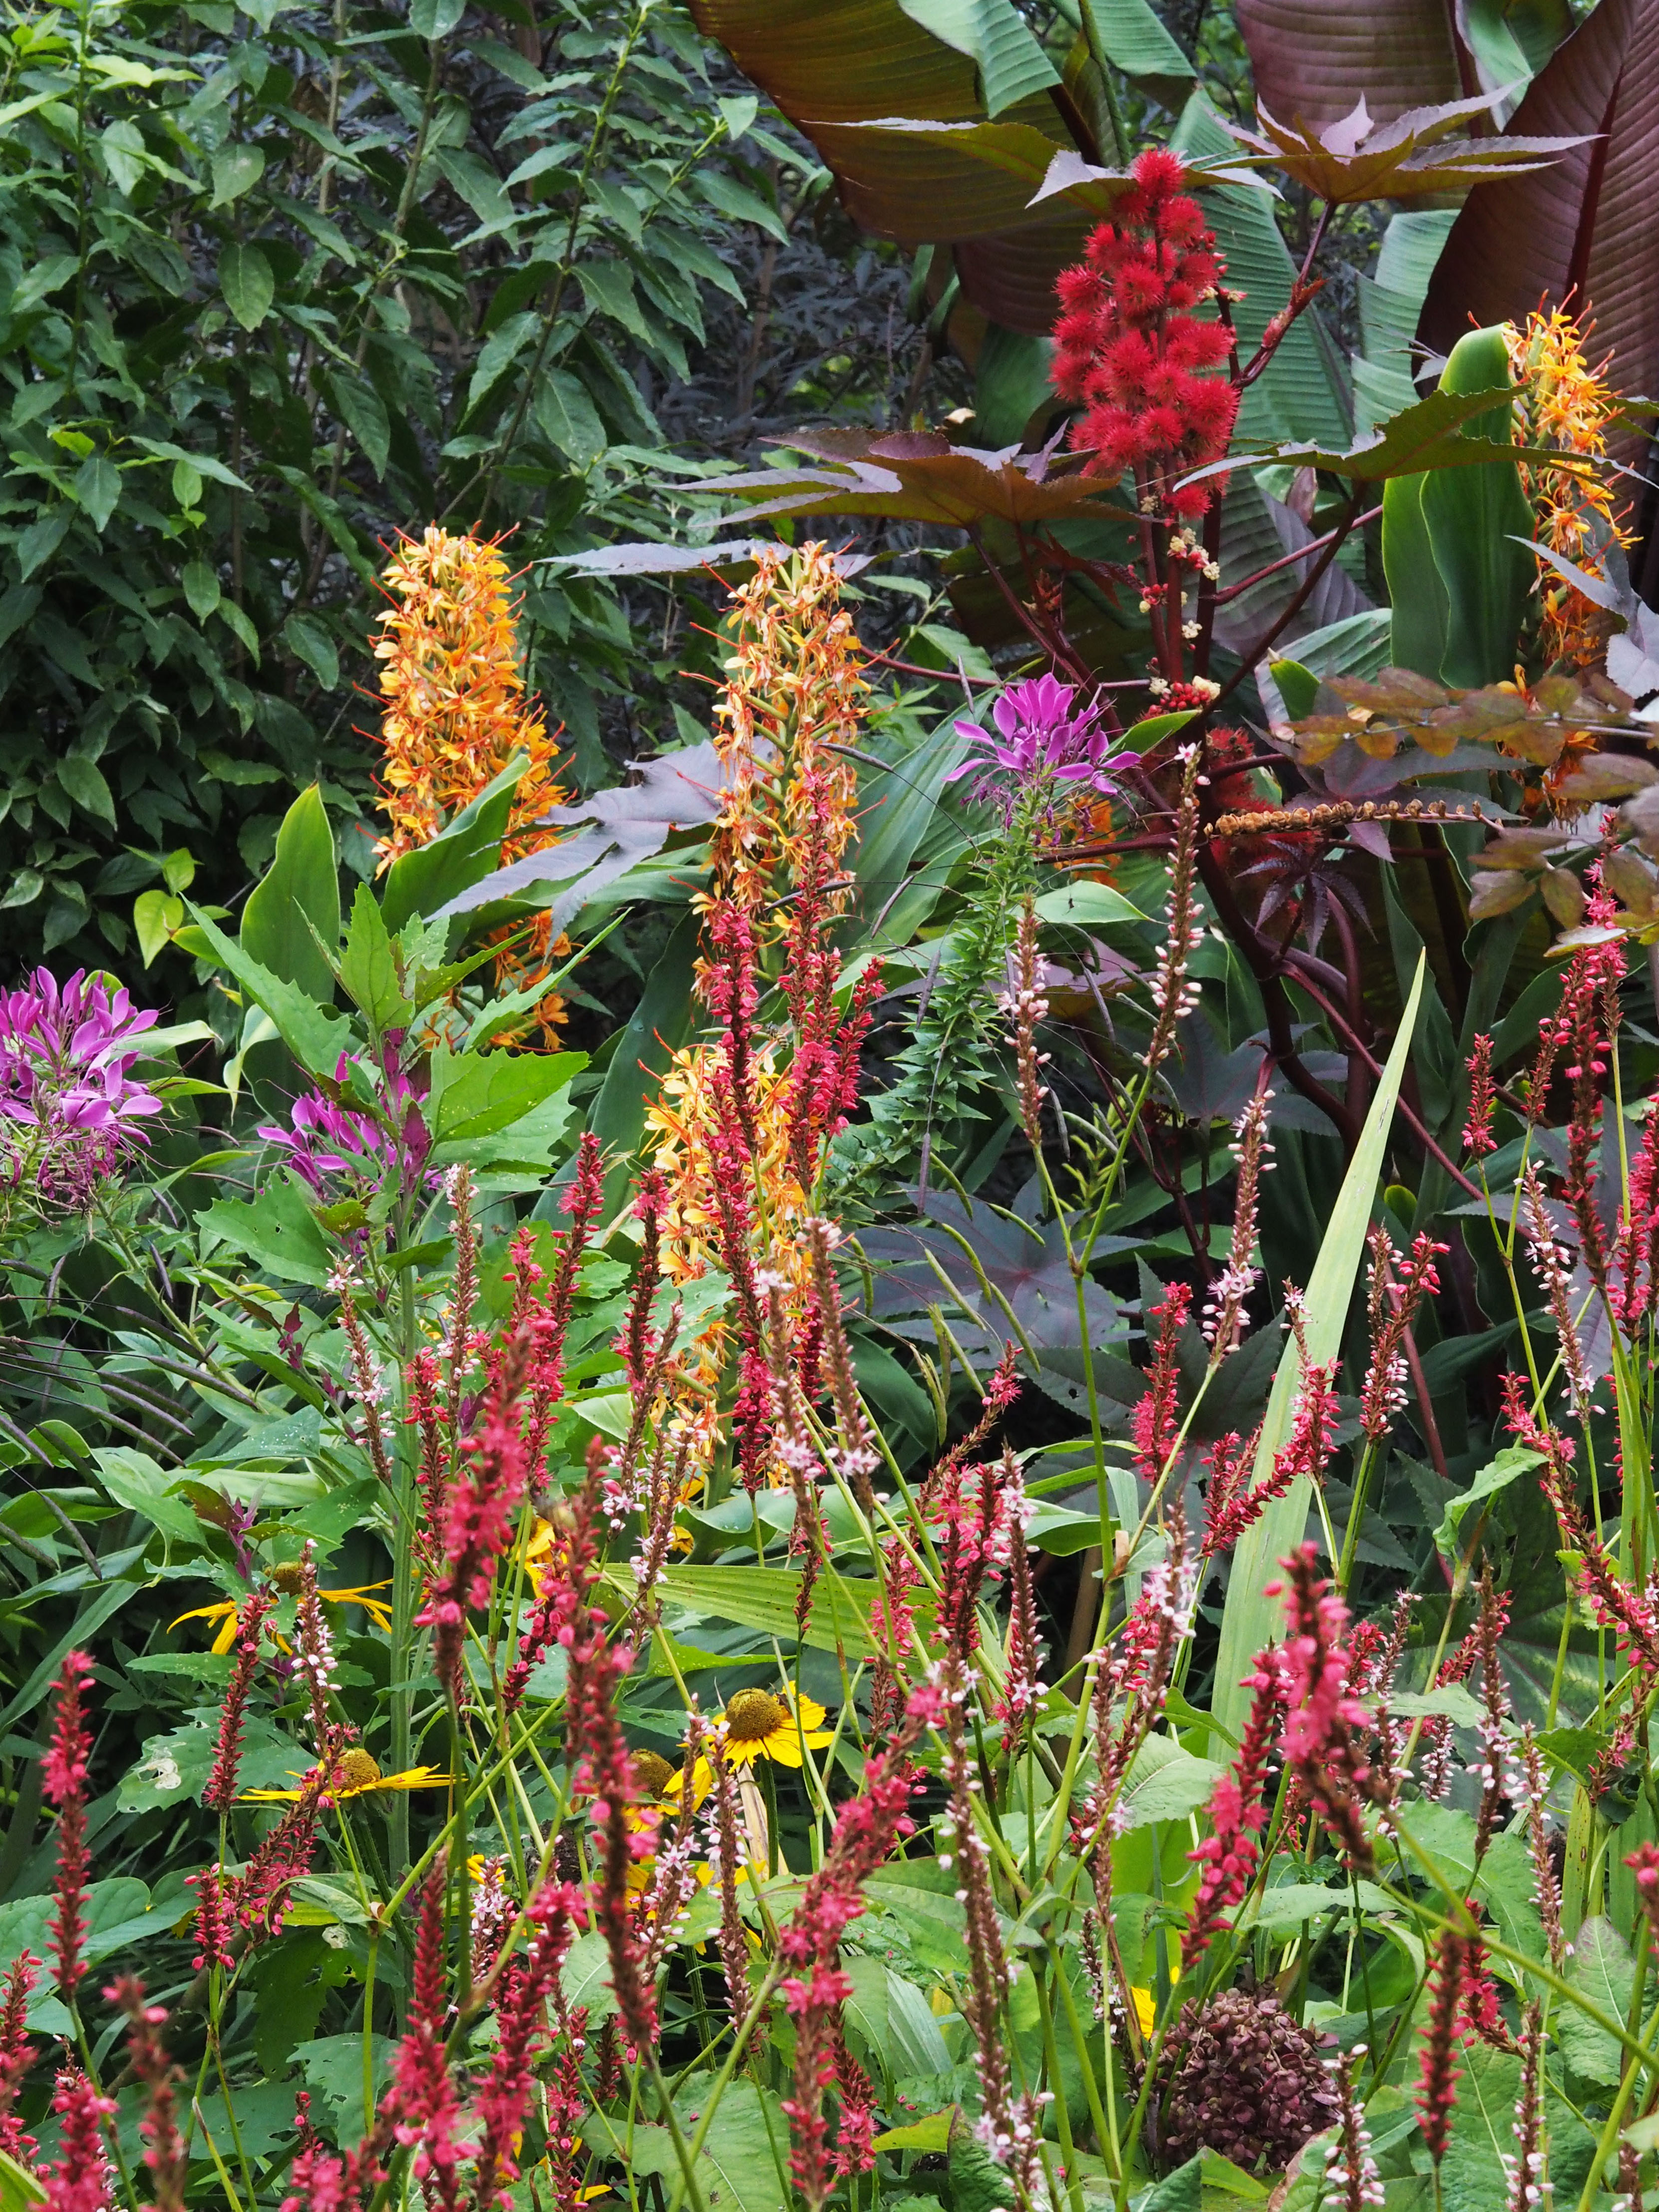 Exotic colours and shapes - persicaria at the Salutation